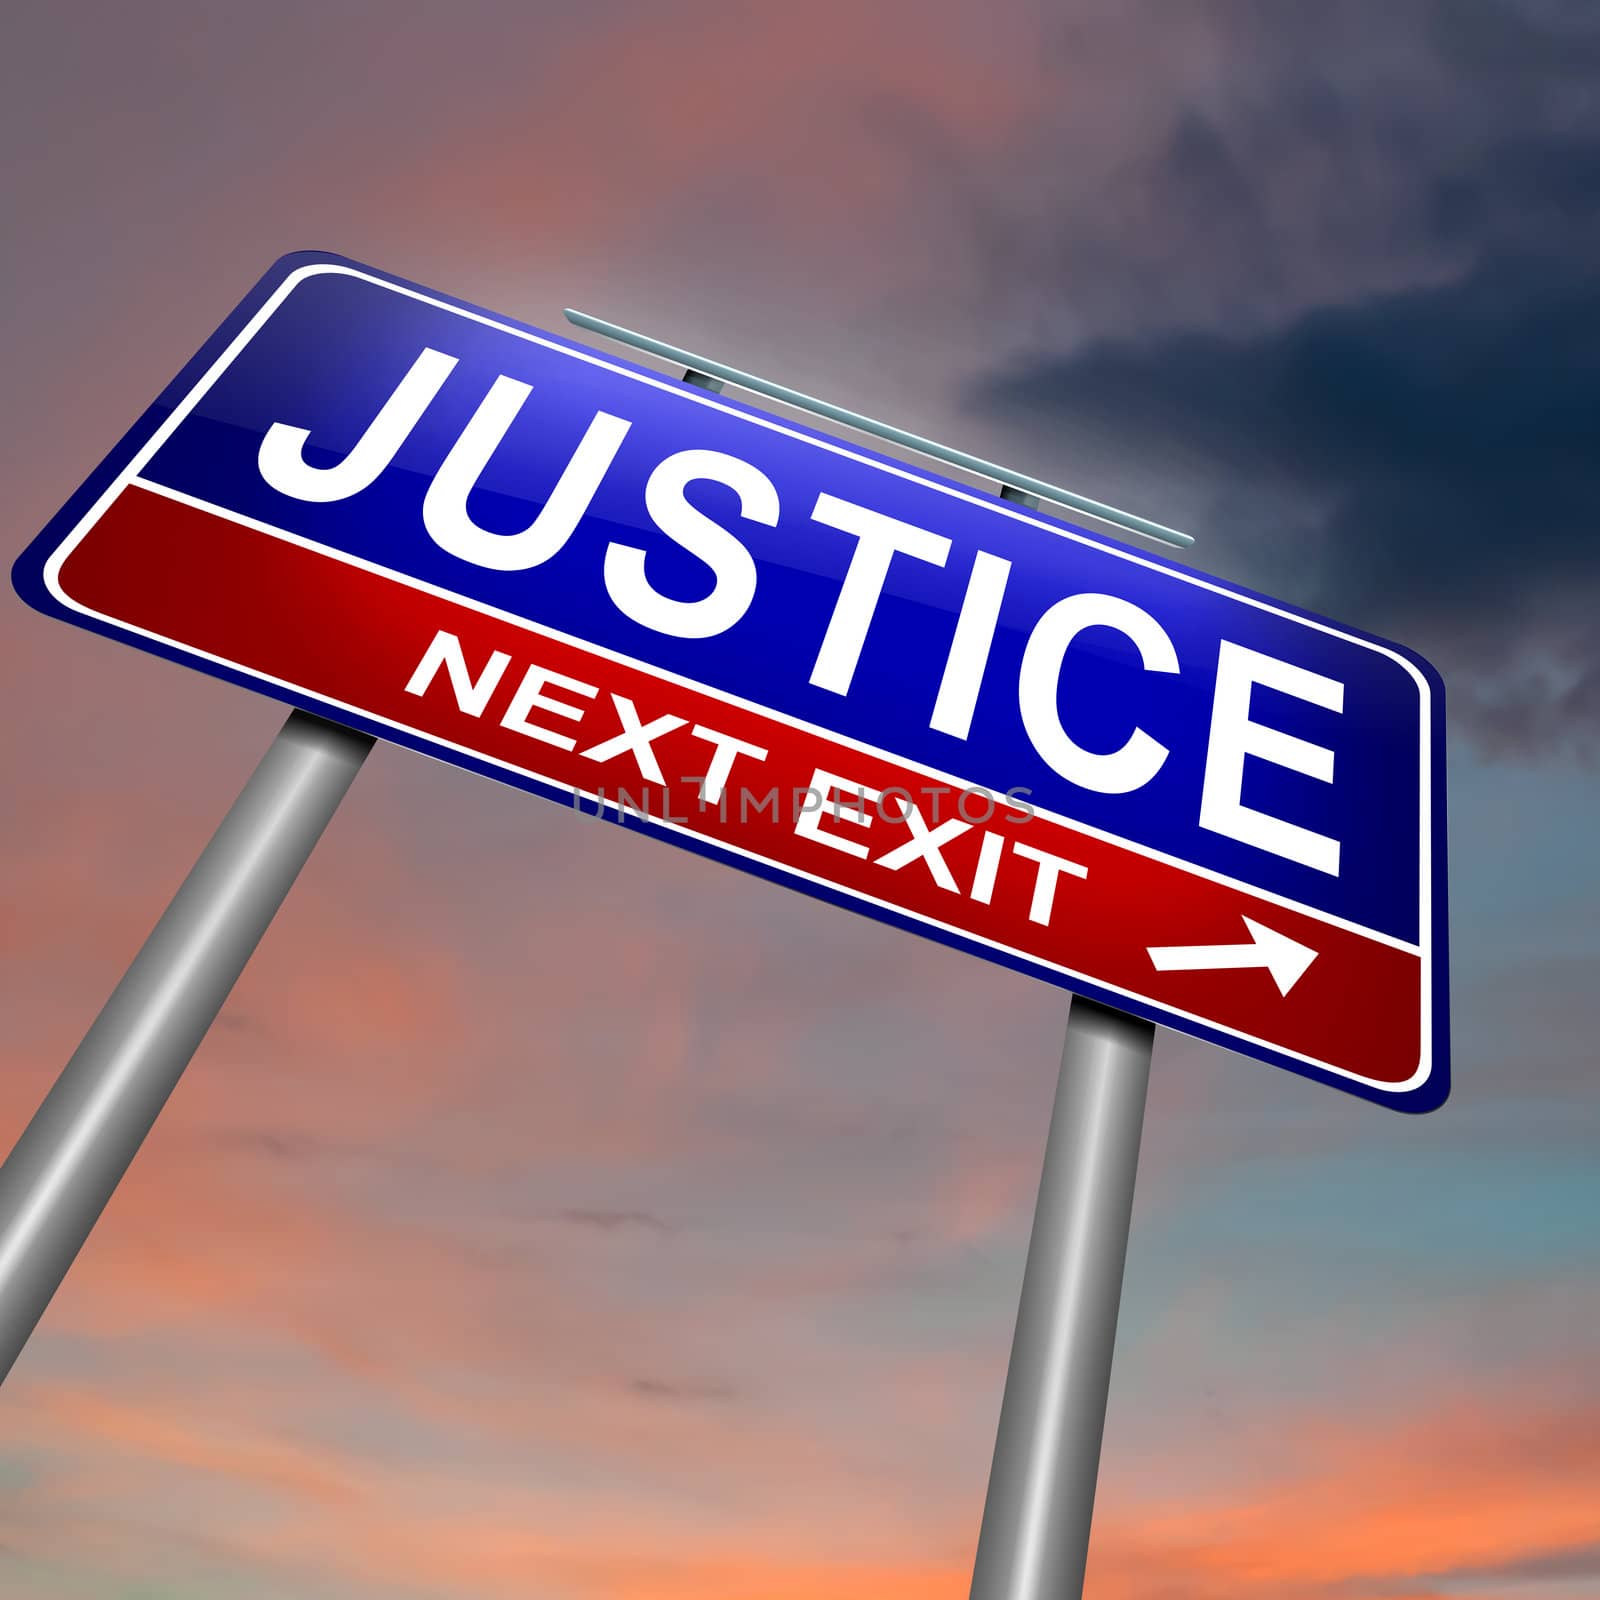 Illustration depicting an illuminated roadsign with a justice concept. Dark sunset sky background.